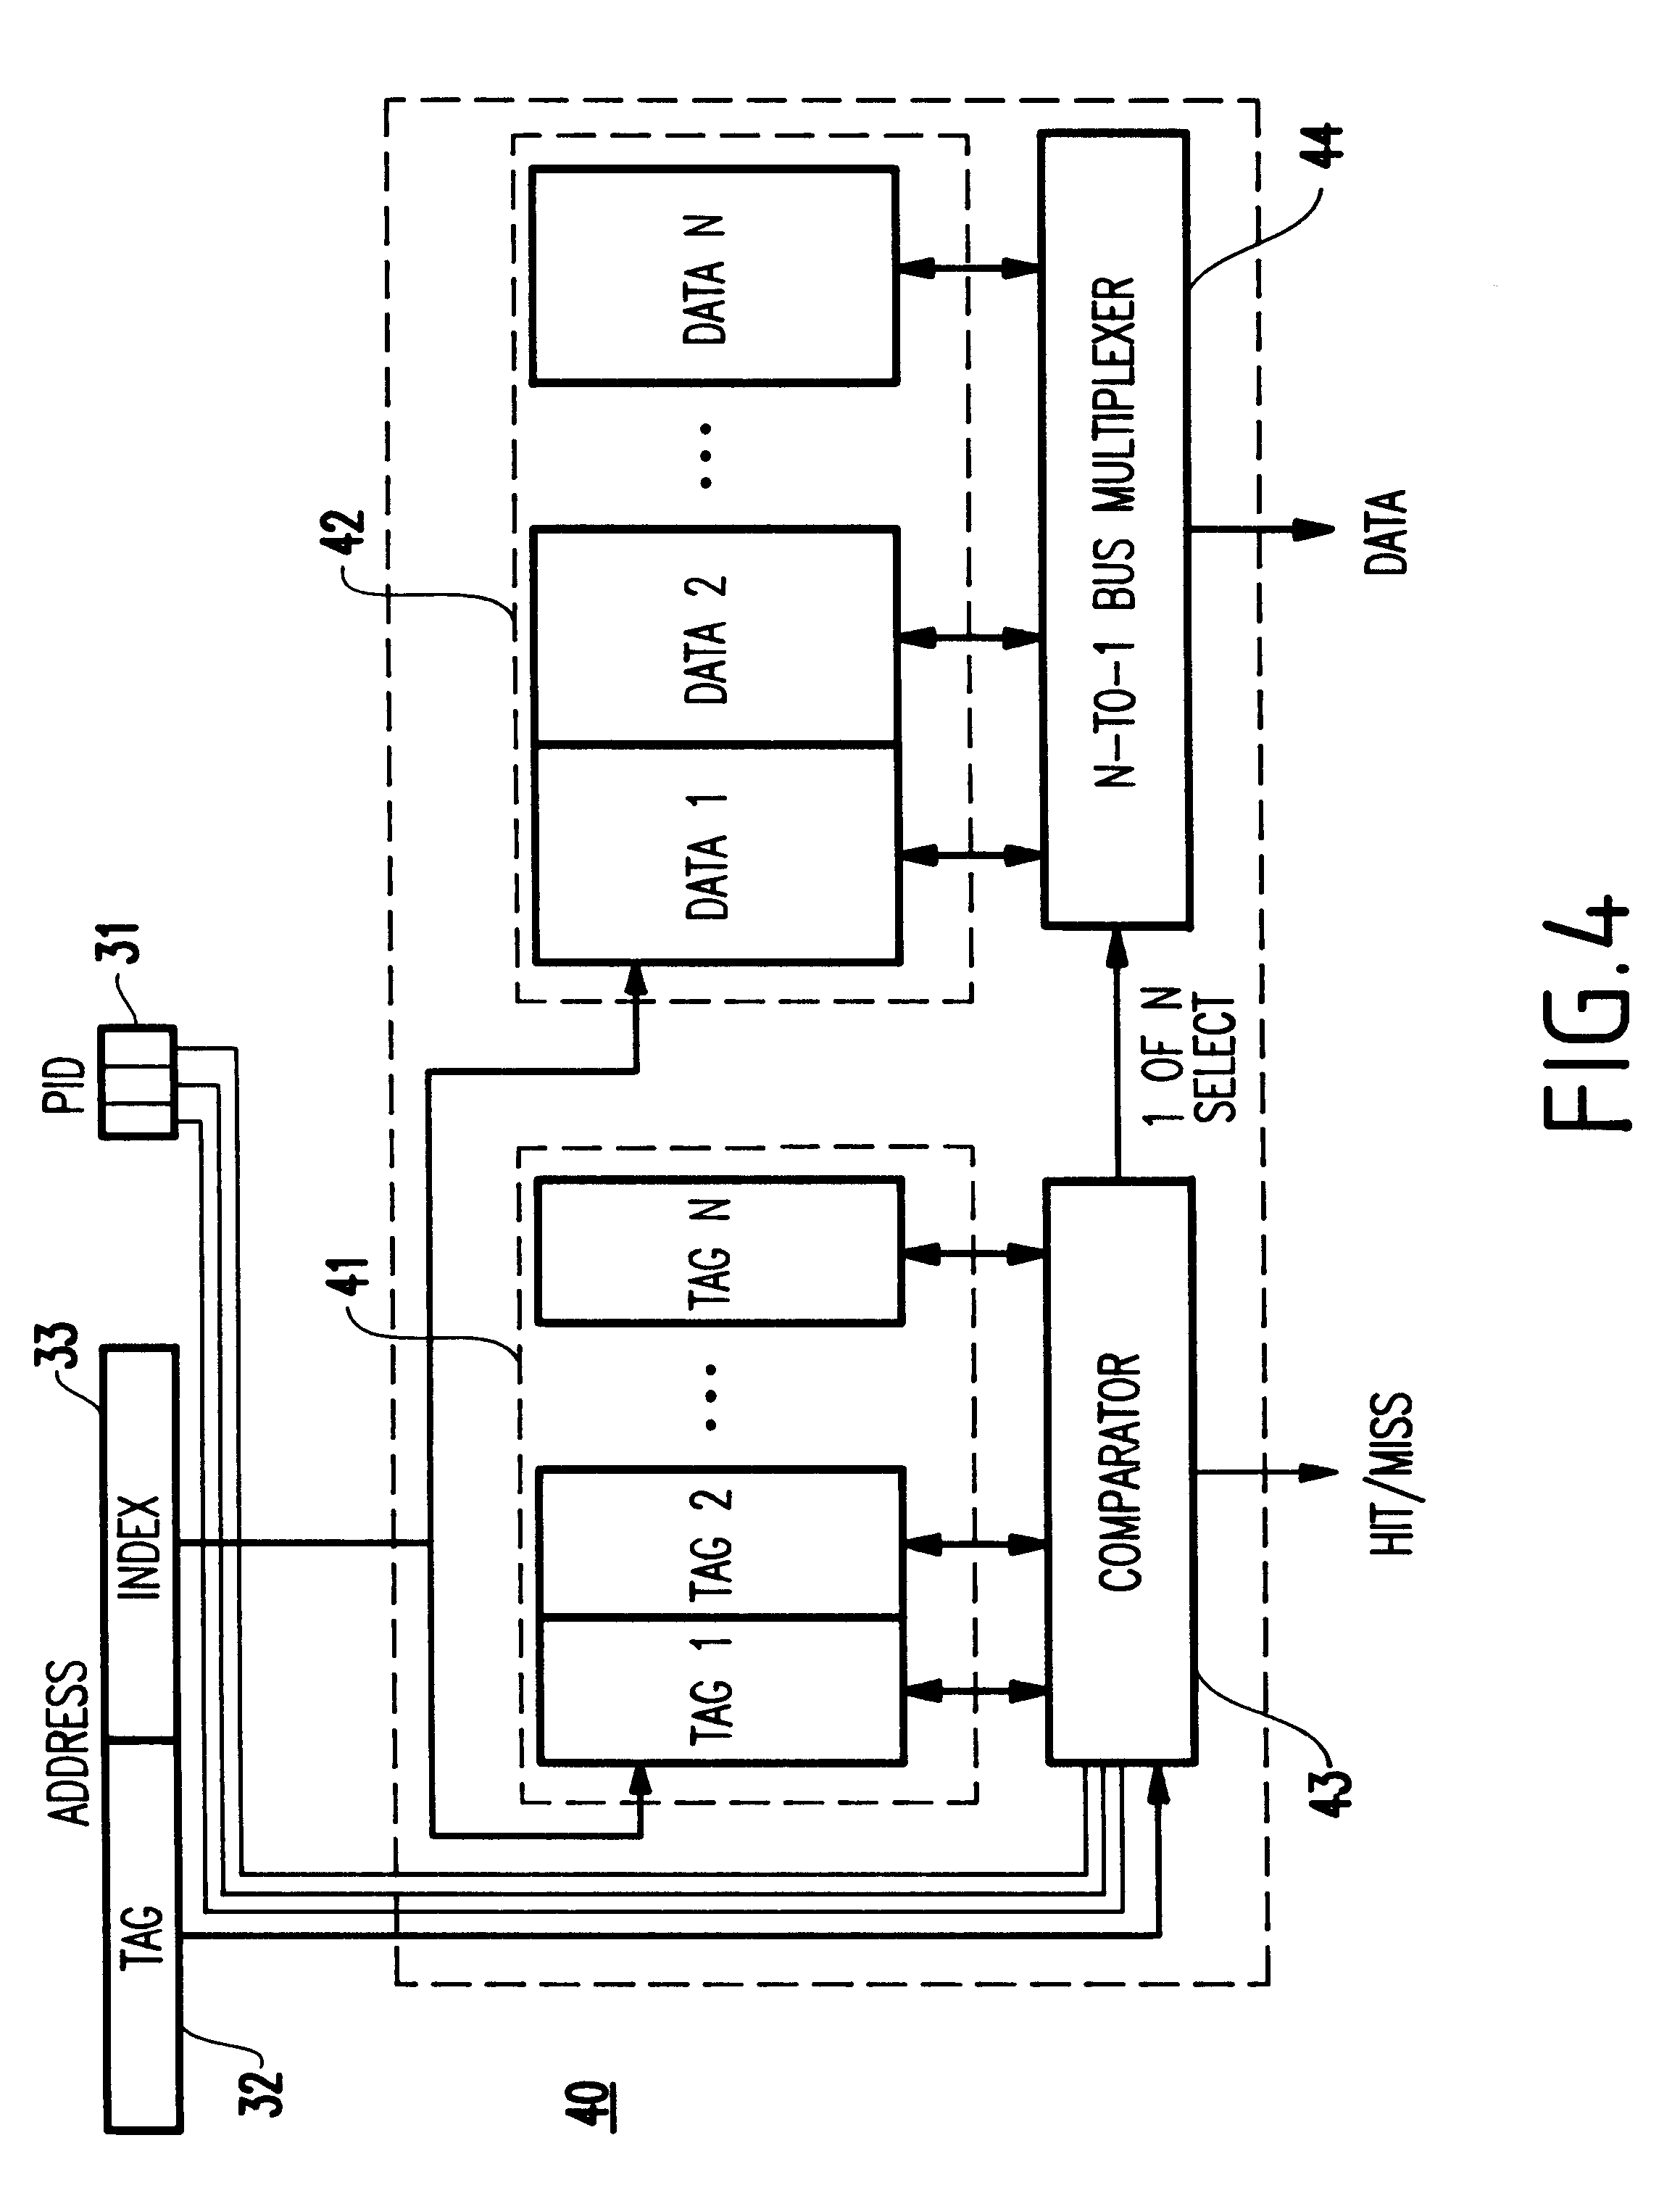 Method and system for dynamically partitioning a shared cache